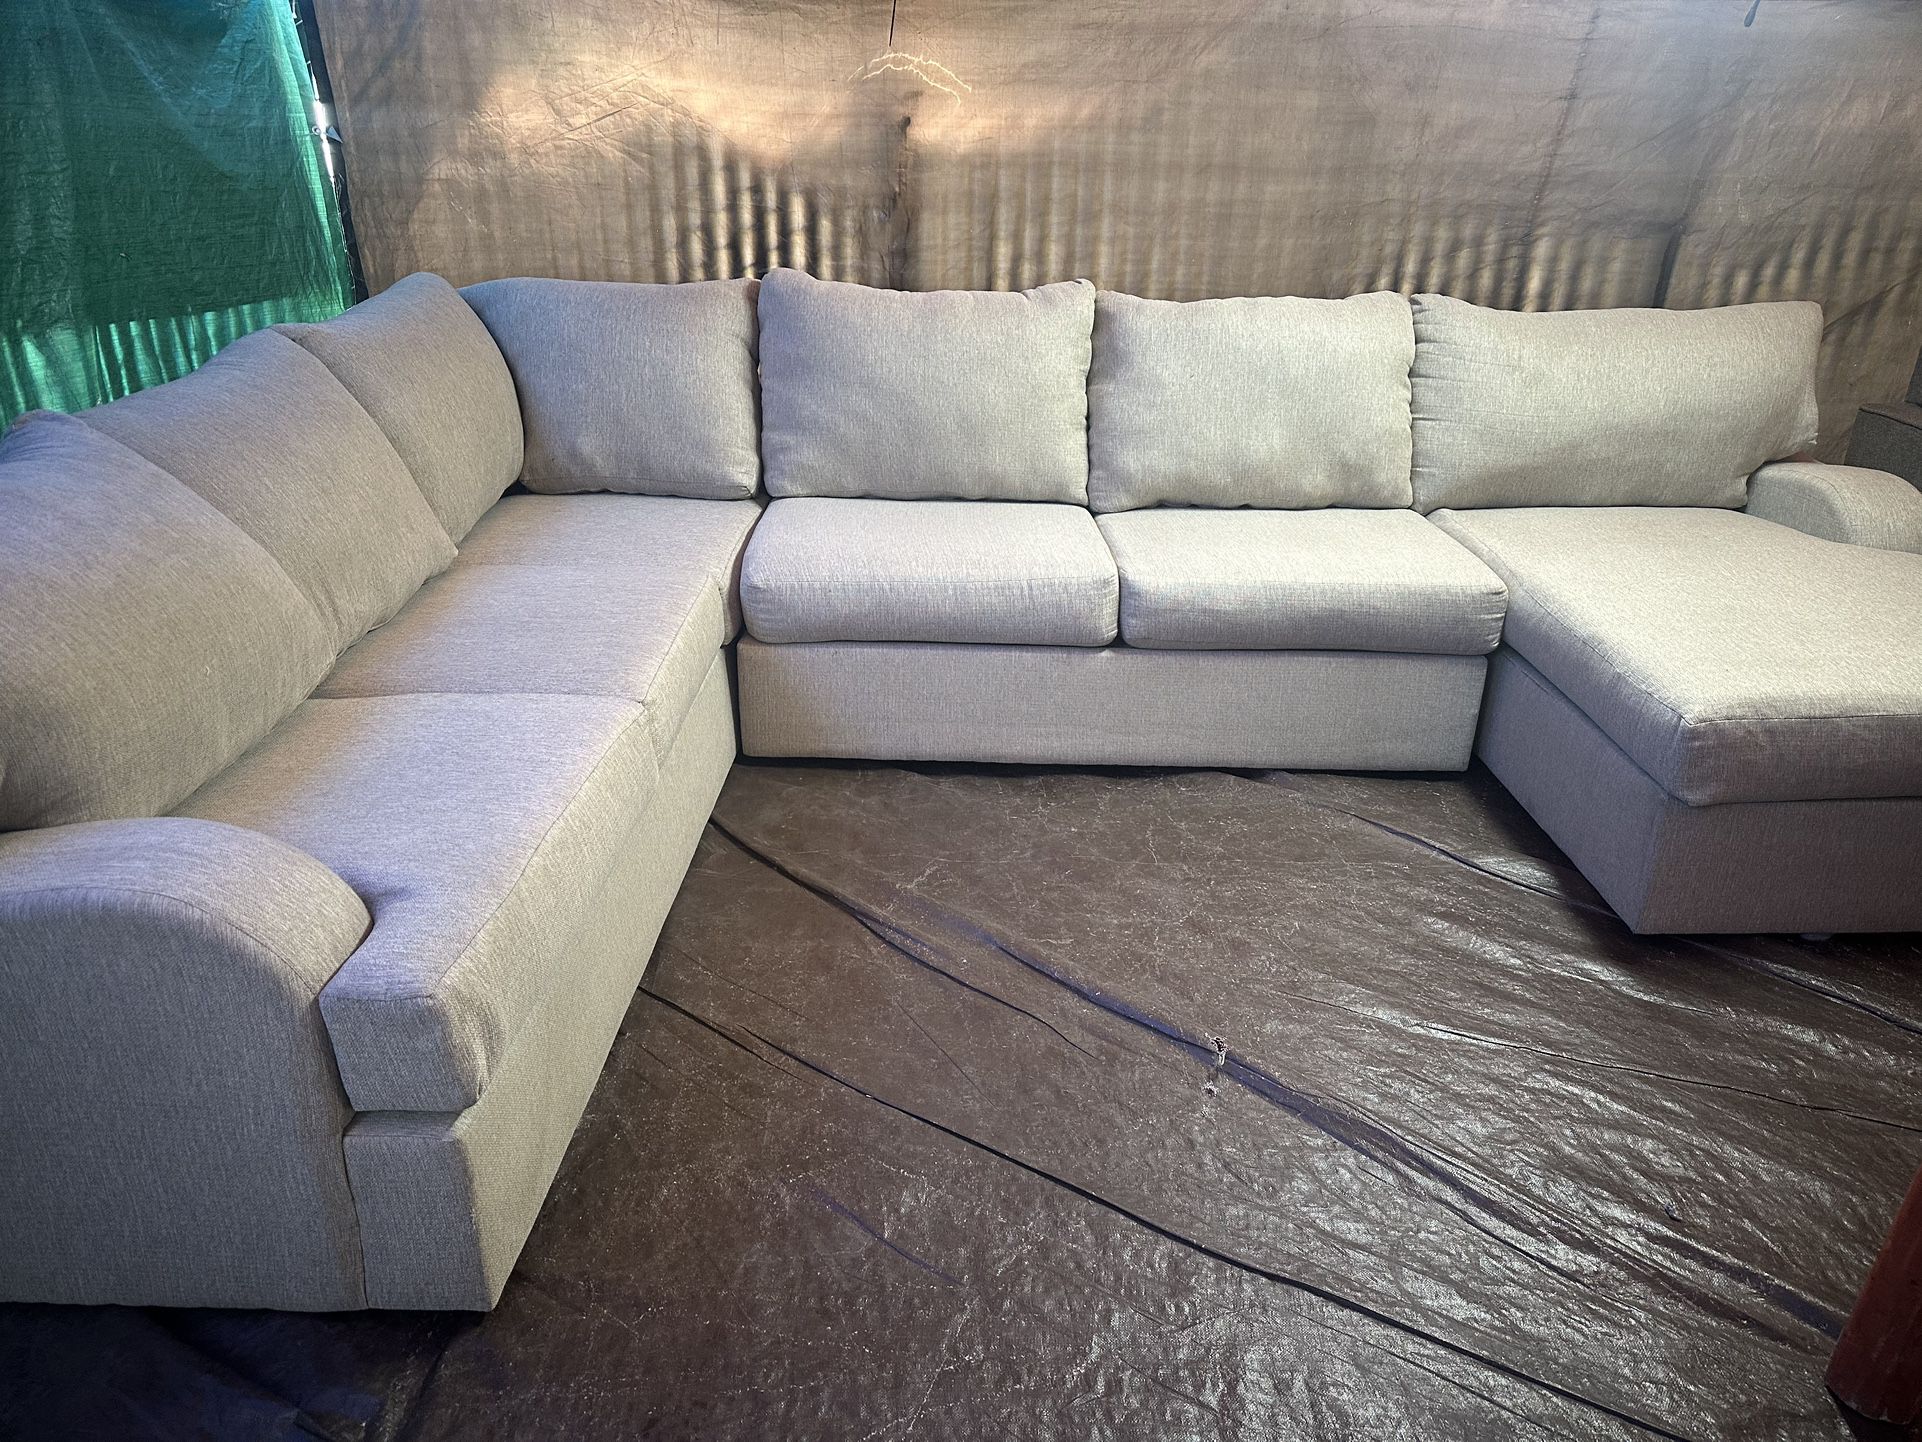 Sectional couch great condition no flaws we sell all the time delivery extra 40 local